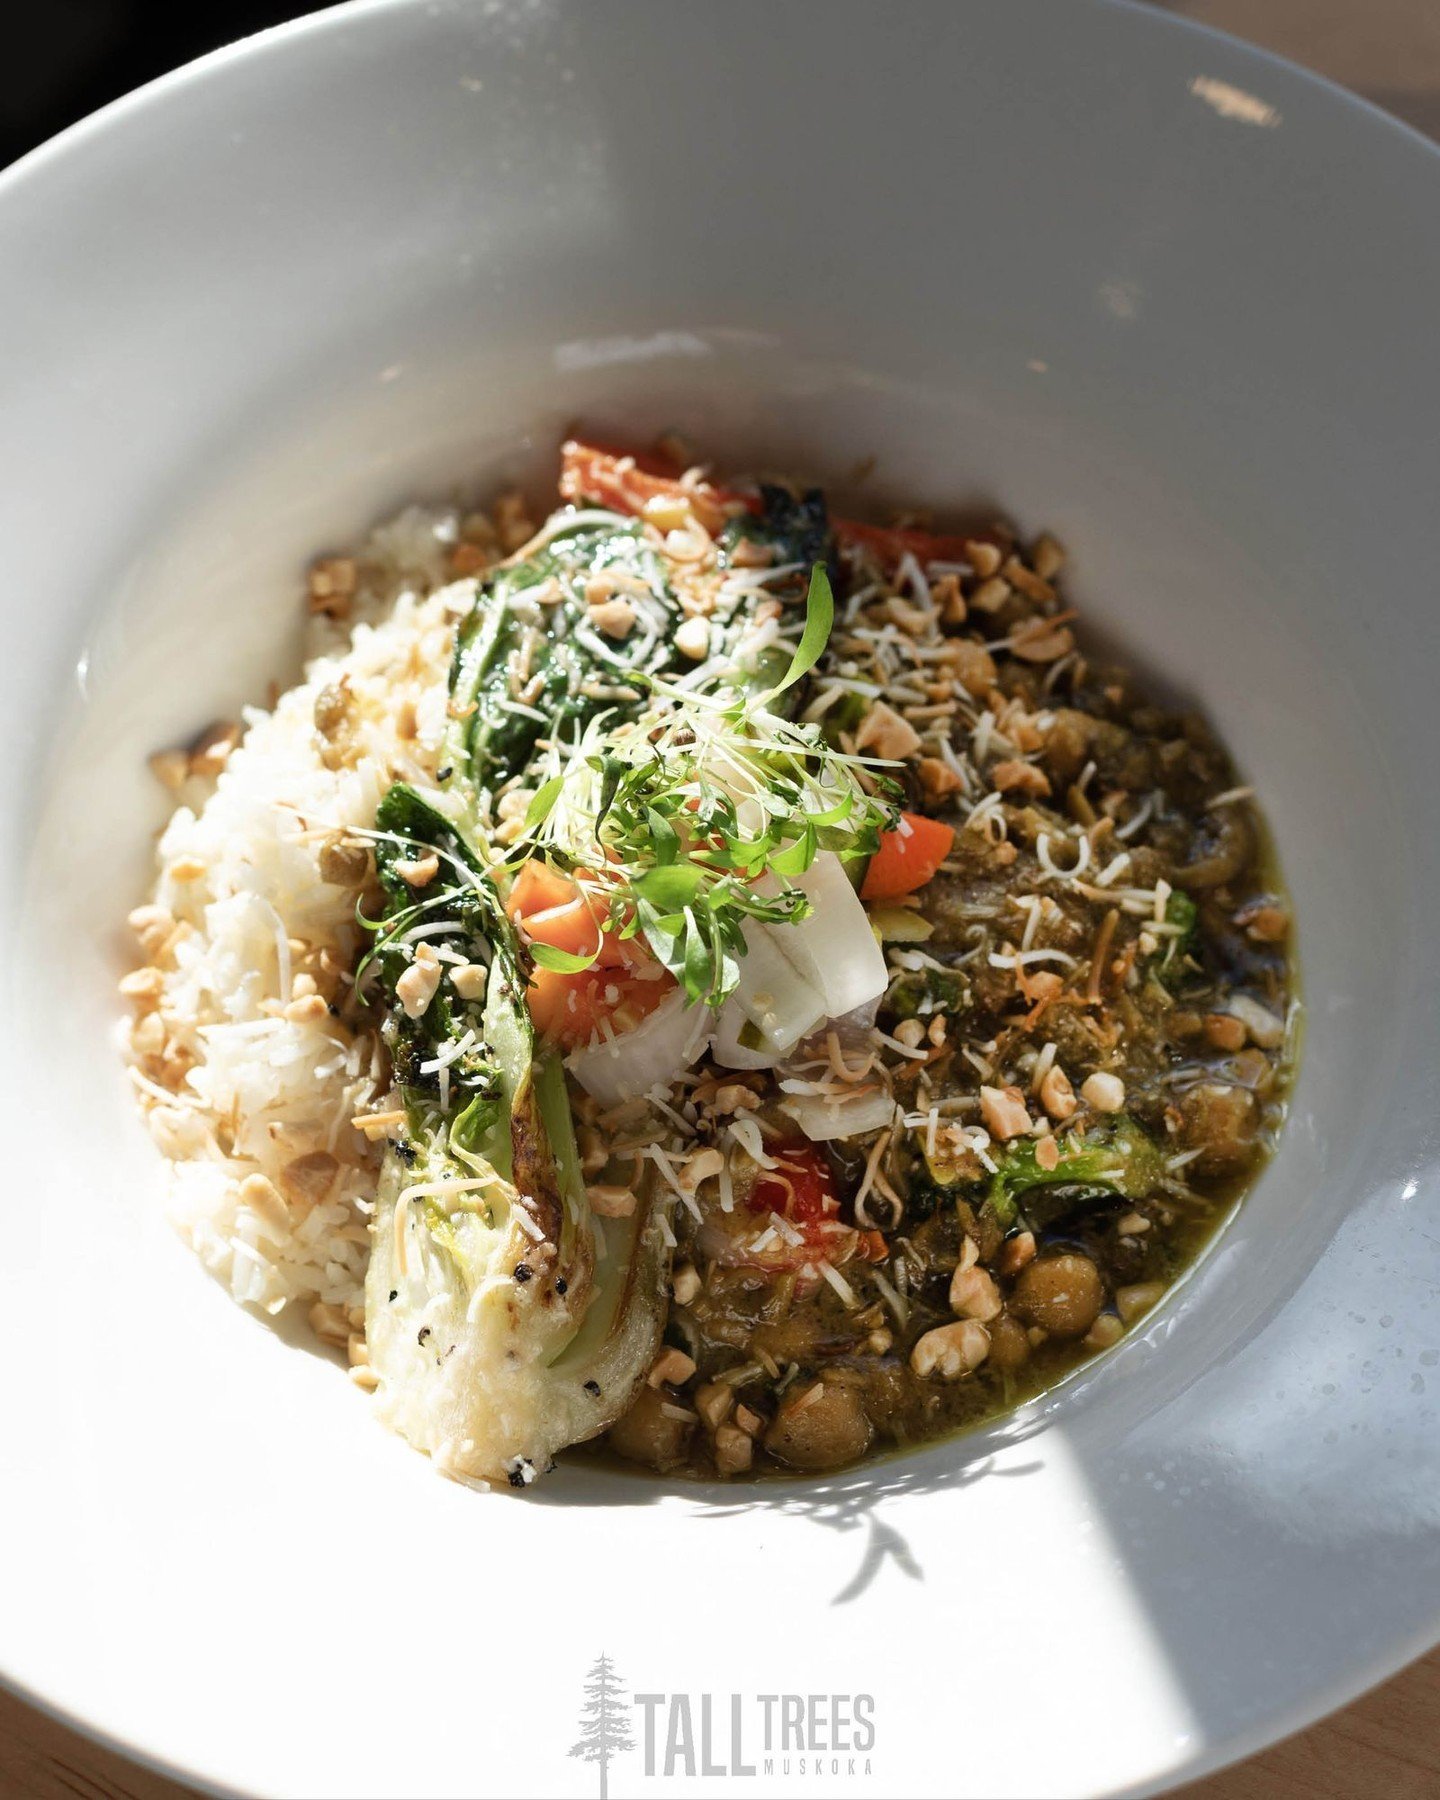 This mild Indonesian-inspired curry is house-made, served with fragrant jasmine rice, accompanied by tangy pickled vegetables, and finished with a sprinkle of roasted, crushed peanuts to reawaken your taste buds. Our Chickpea and Lentil Coconut Renda